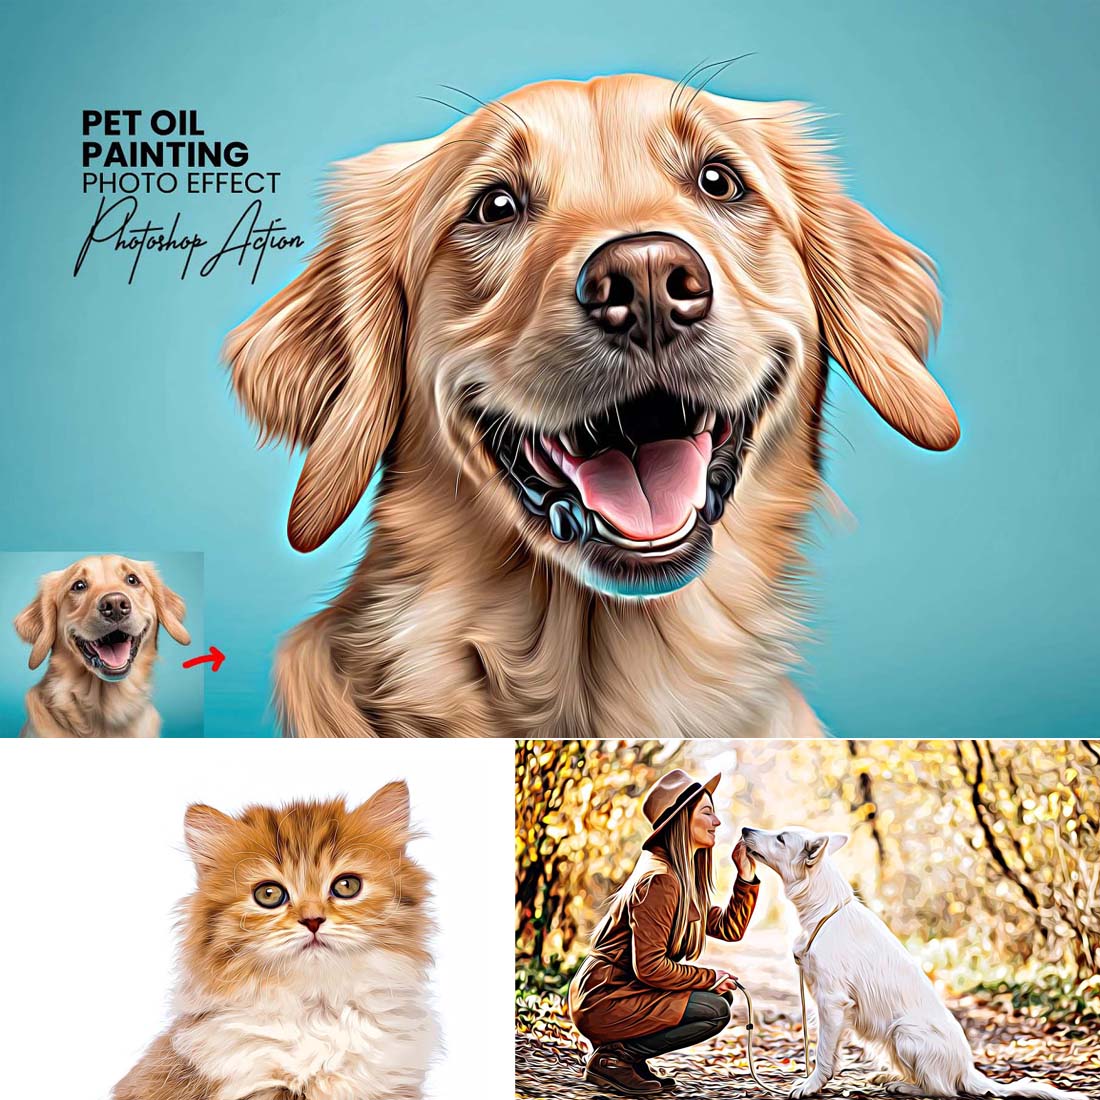 Pet Oil Painting cover image.